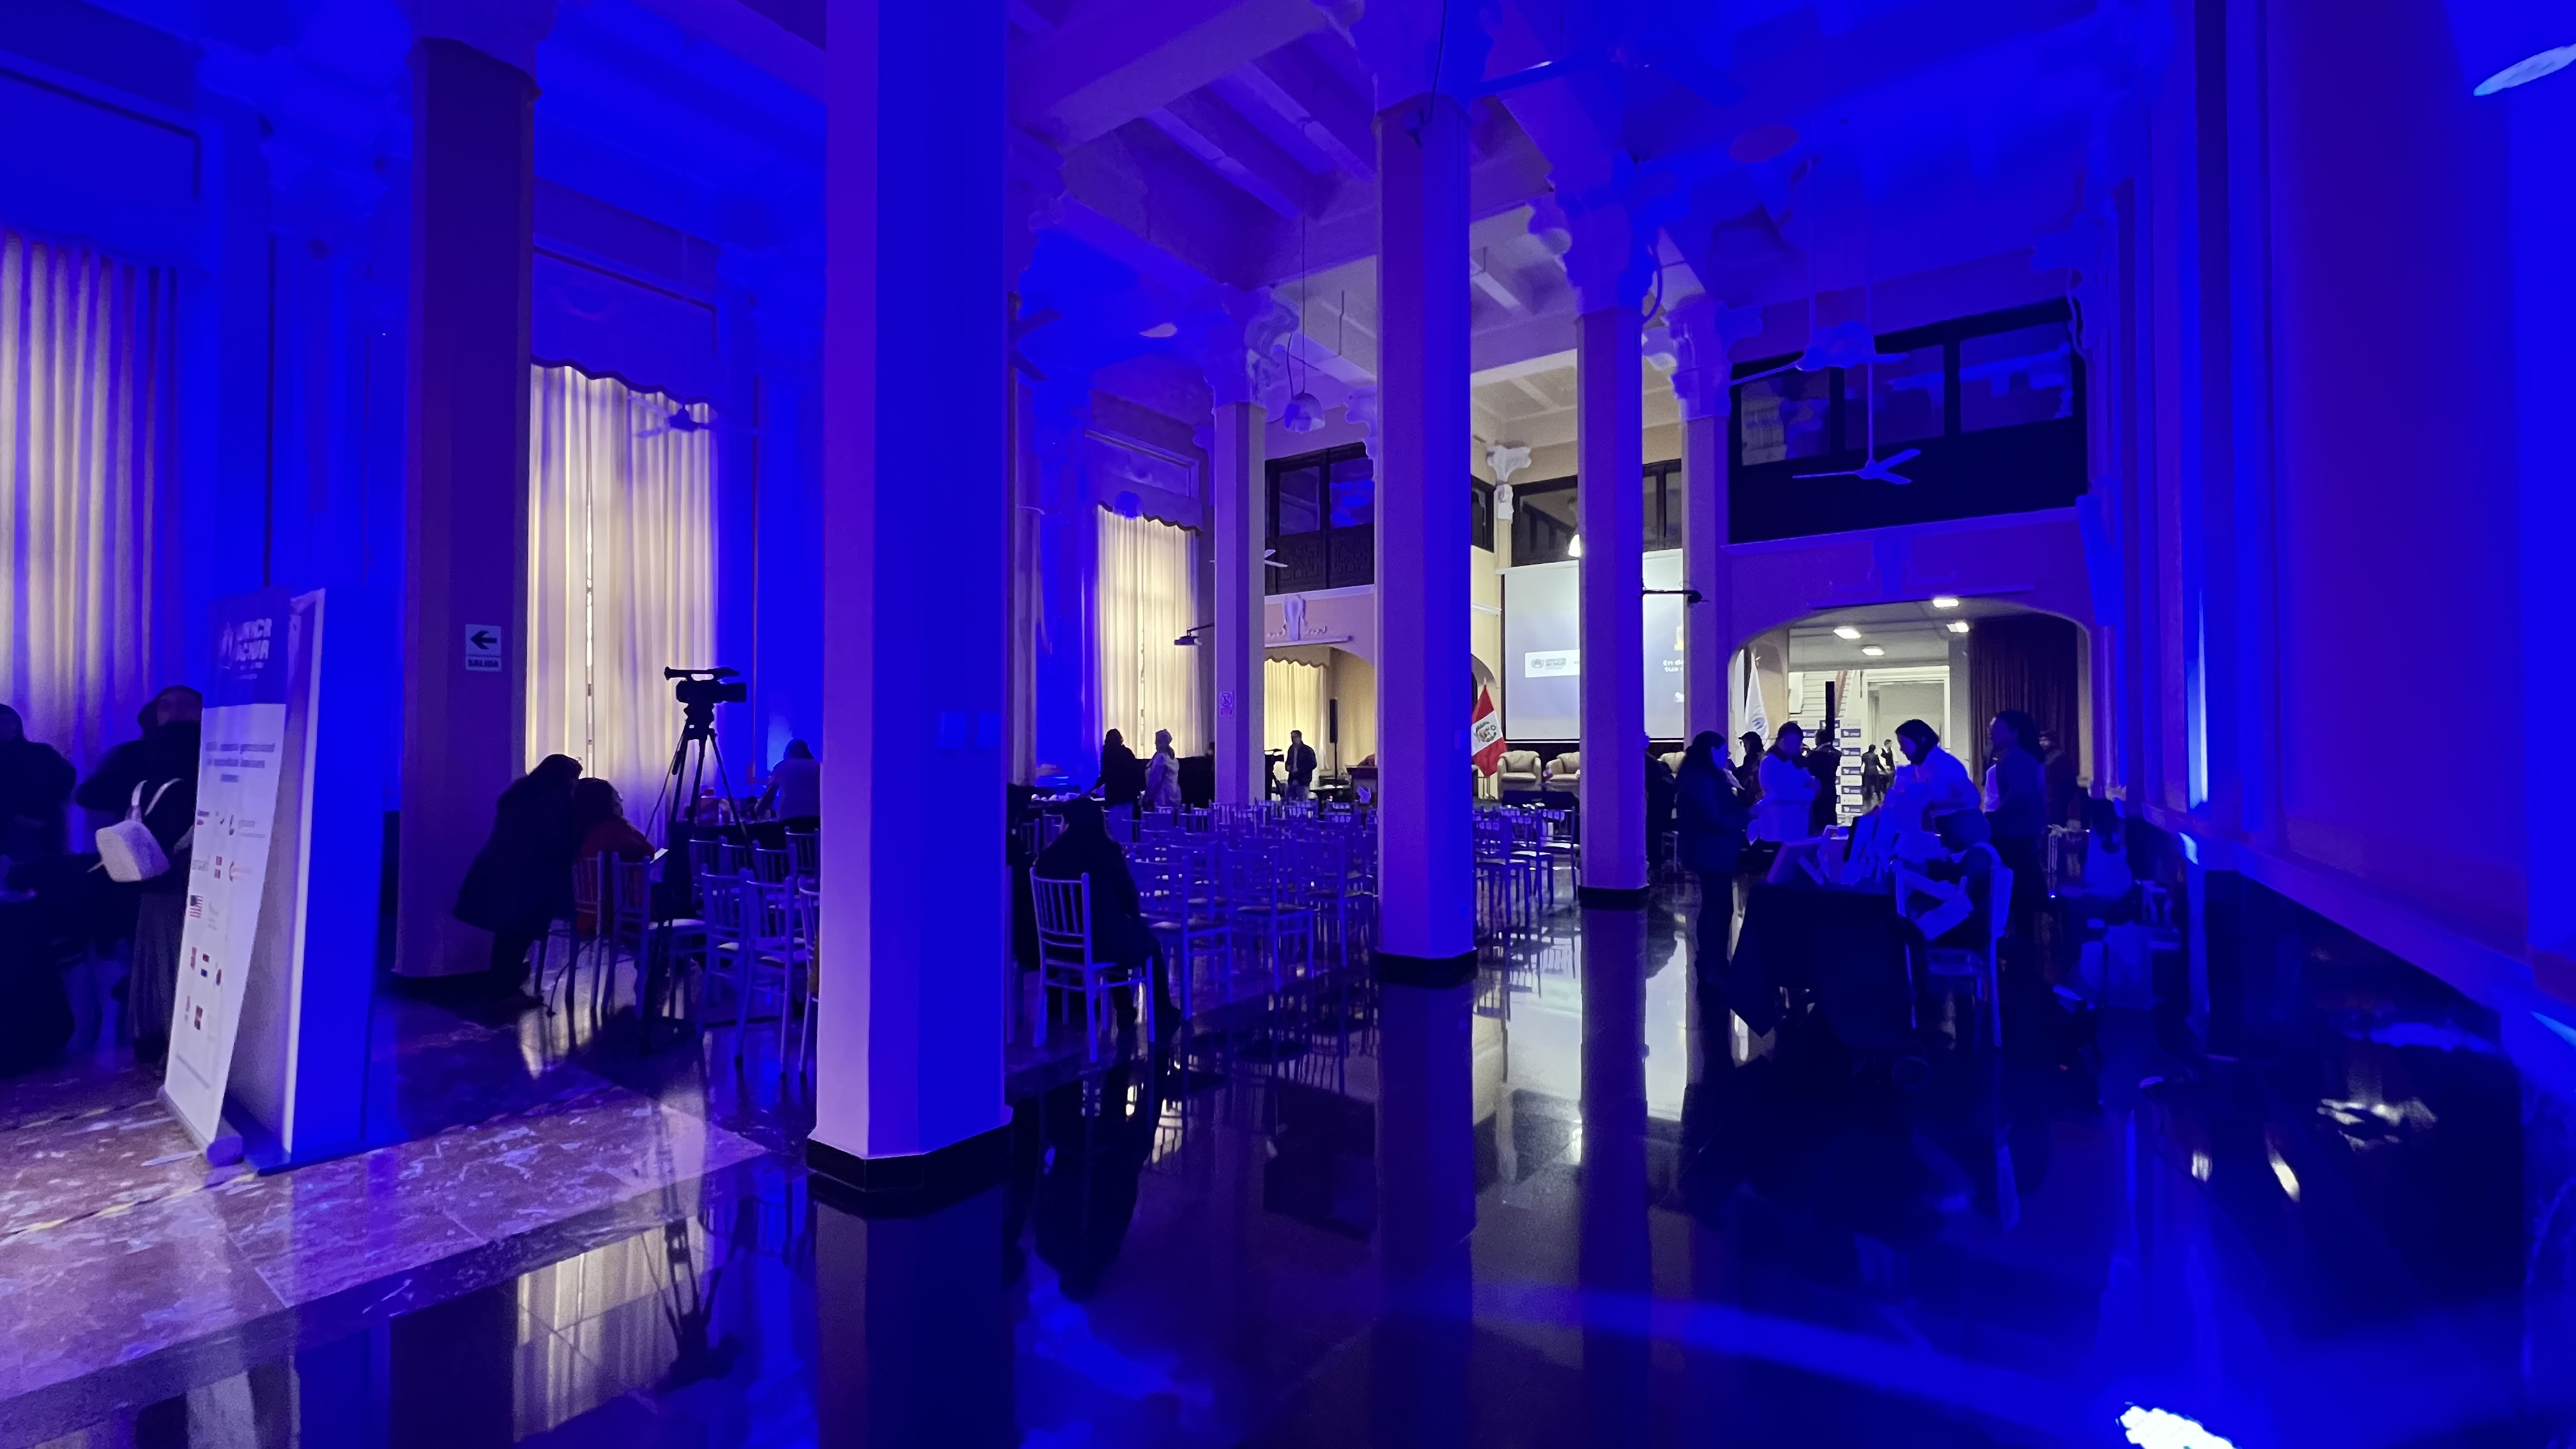 The interior of a large room illuminated in blue light.